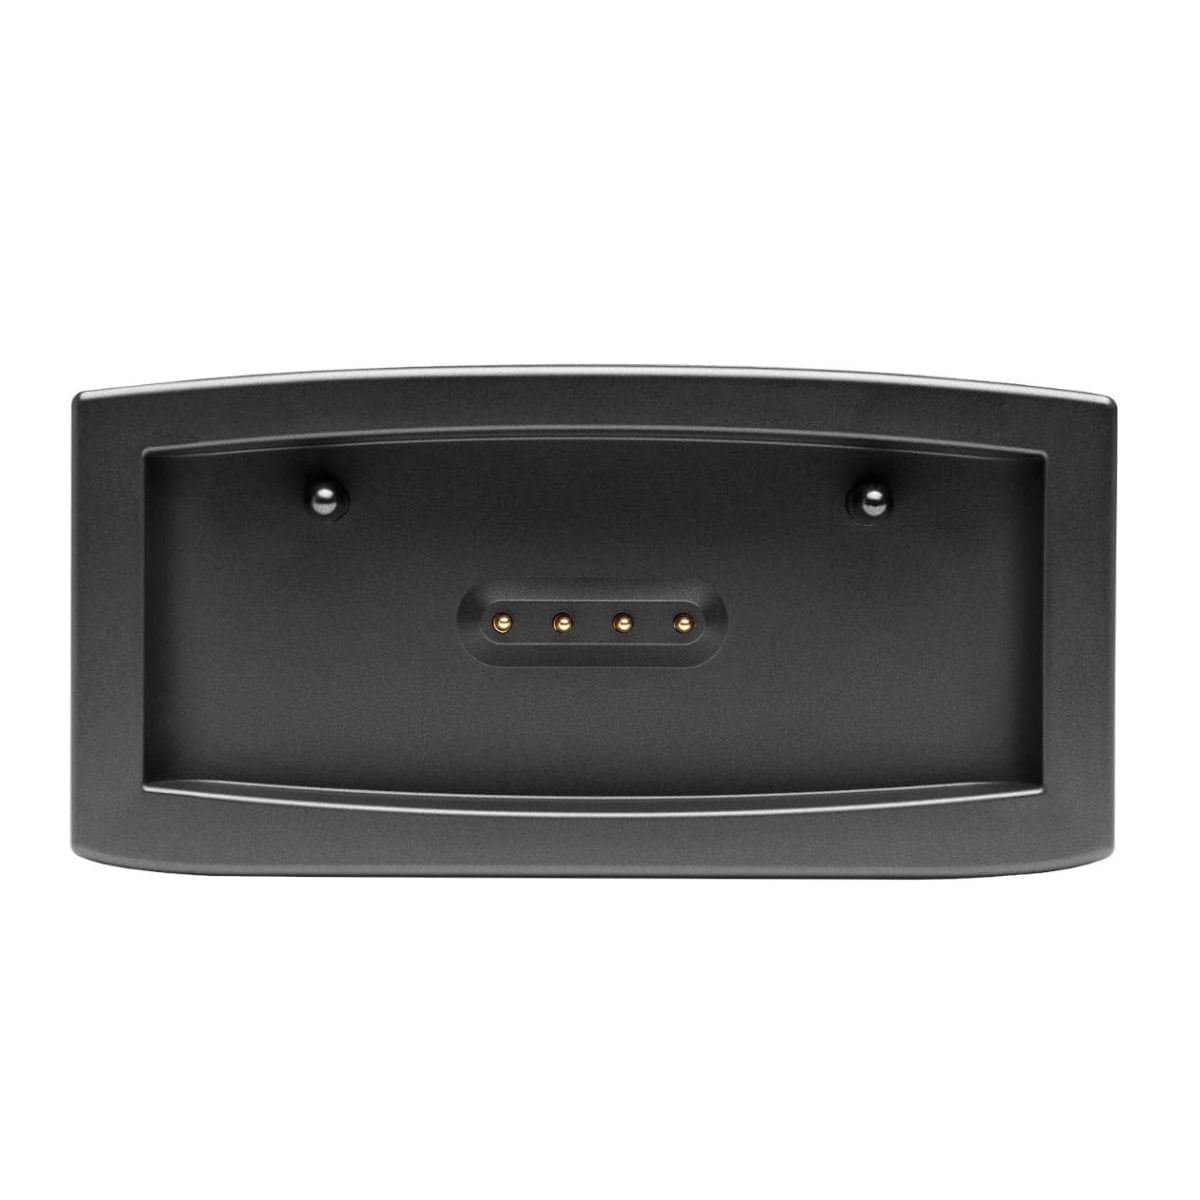 61Aek I0Dxl. Ac Sl1200 Jbl &Lt;H1&Gt;Jbl Bar 9.1 True Wireless Surround With Dolby Atmos&Lt;/H1&Gt; Https://Www.youtube.com/Watch?V=Wqyzdx2-Nne Upgrade Your Home Theater With This Jbl Bar 9.1-Channel Jbl Soundbar System. The Powerful 820W Output Offers An Immersive Movie And Music Experience, While Bluetooth, Airplay 2 And Chromecast Connectivity Lets You Stream Audio Smoothly. This Jbl Bar 9.1-Channel Soundbar System Has Detachable Speakers With Rechargeable Batteries For Flexible Placement, And Dolby Atmos Technology Delivers Quality Surround Sound. Jbl Soundbar Jbl Bar 9.1 True Wireless Surround With Dolby Atmos Soundbar